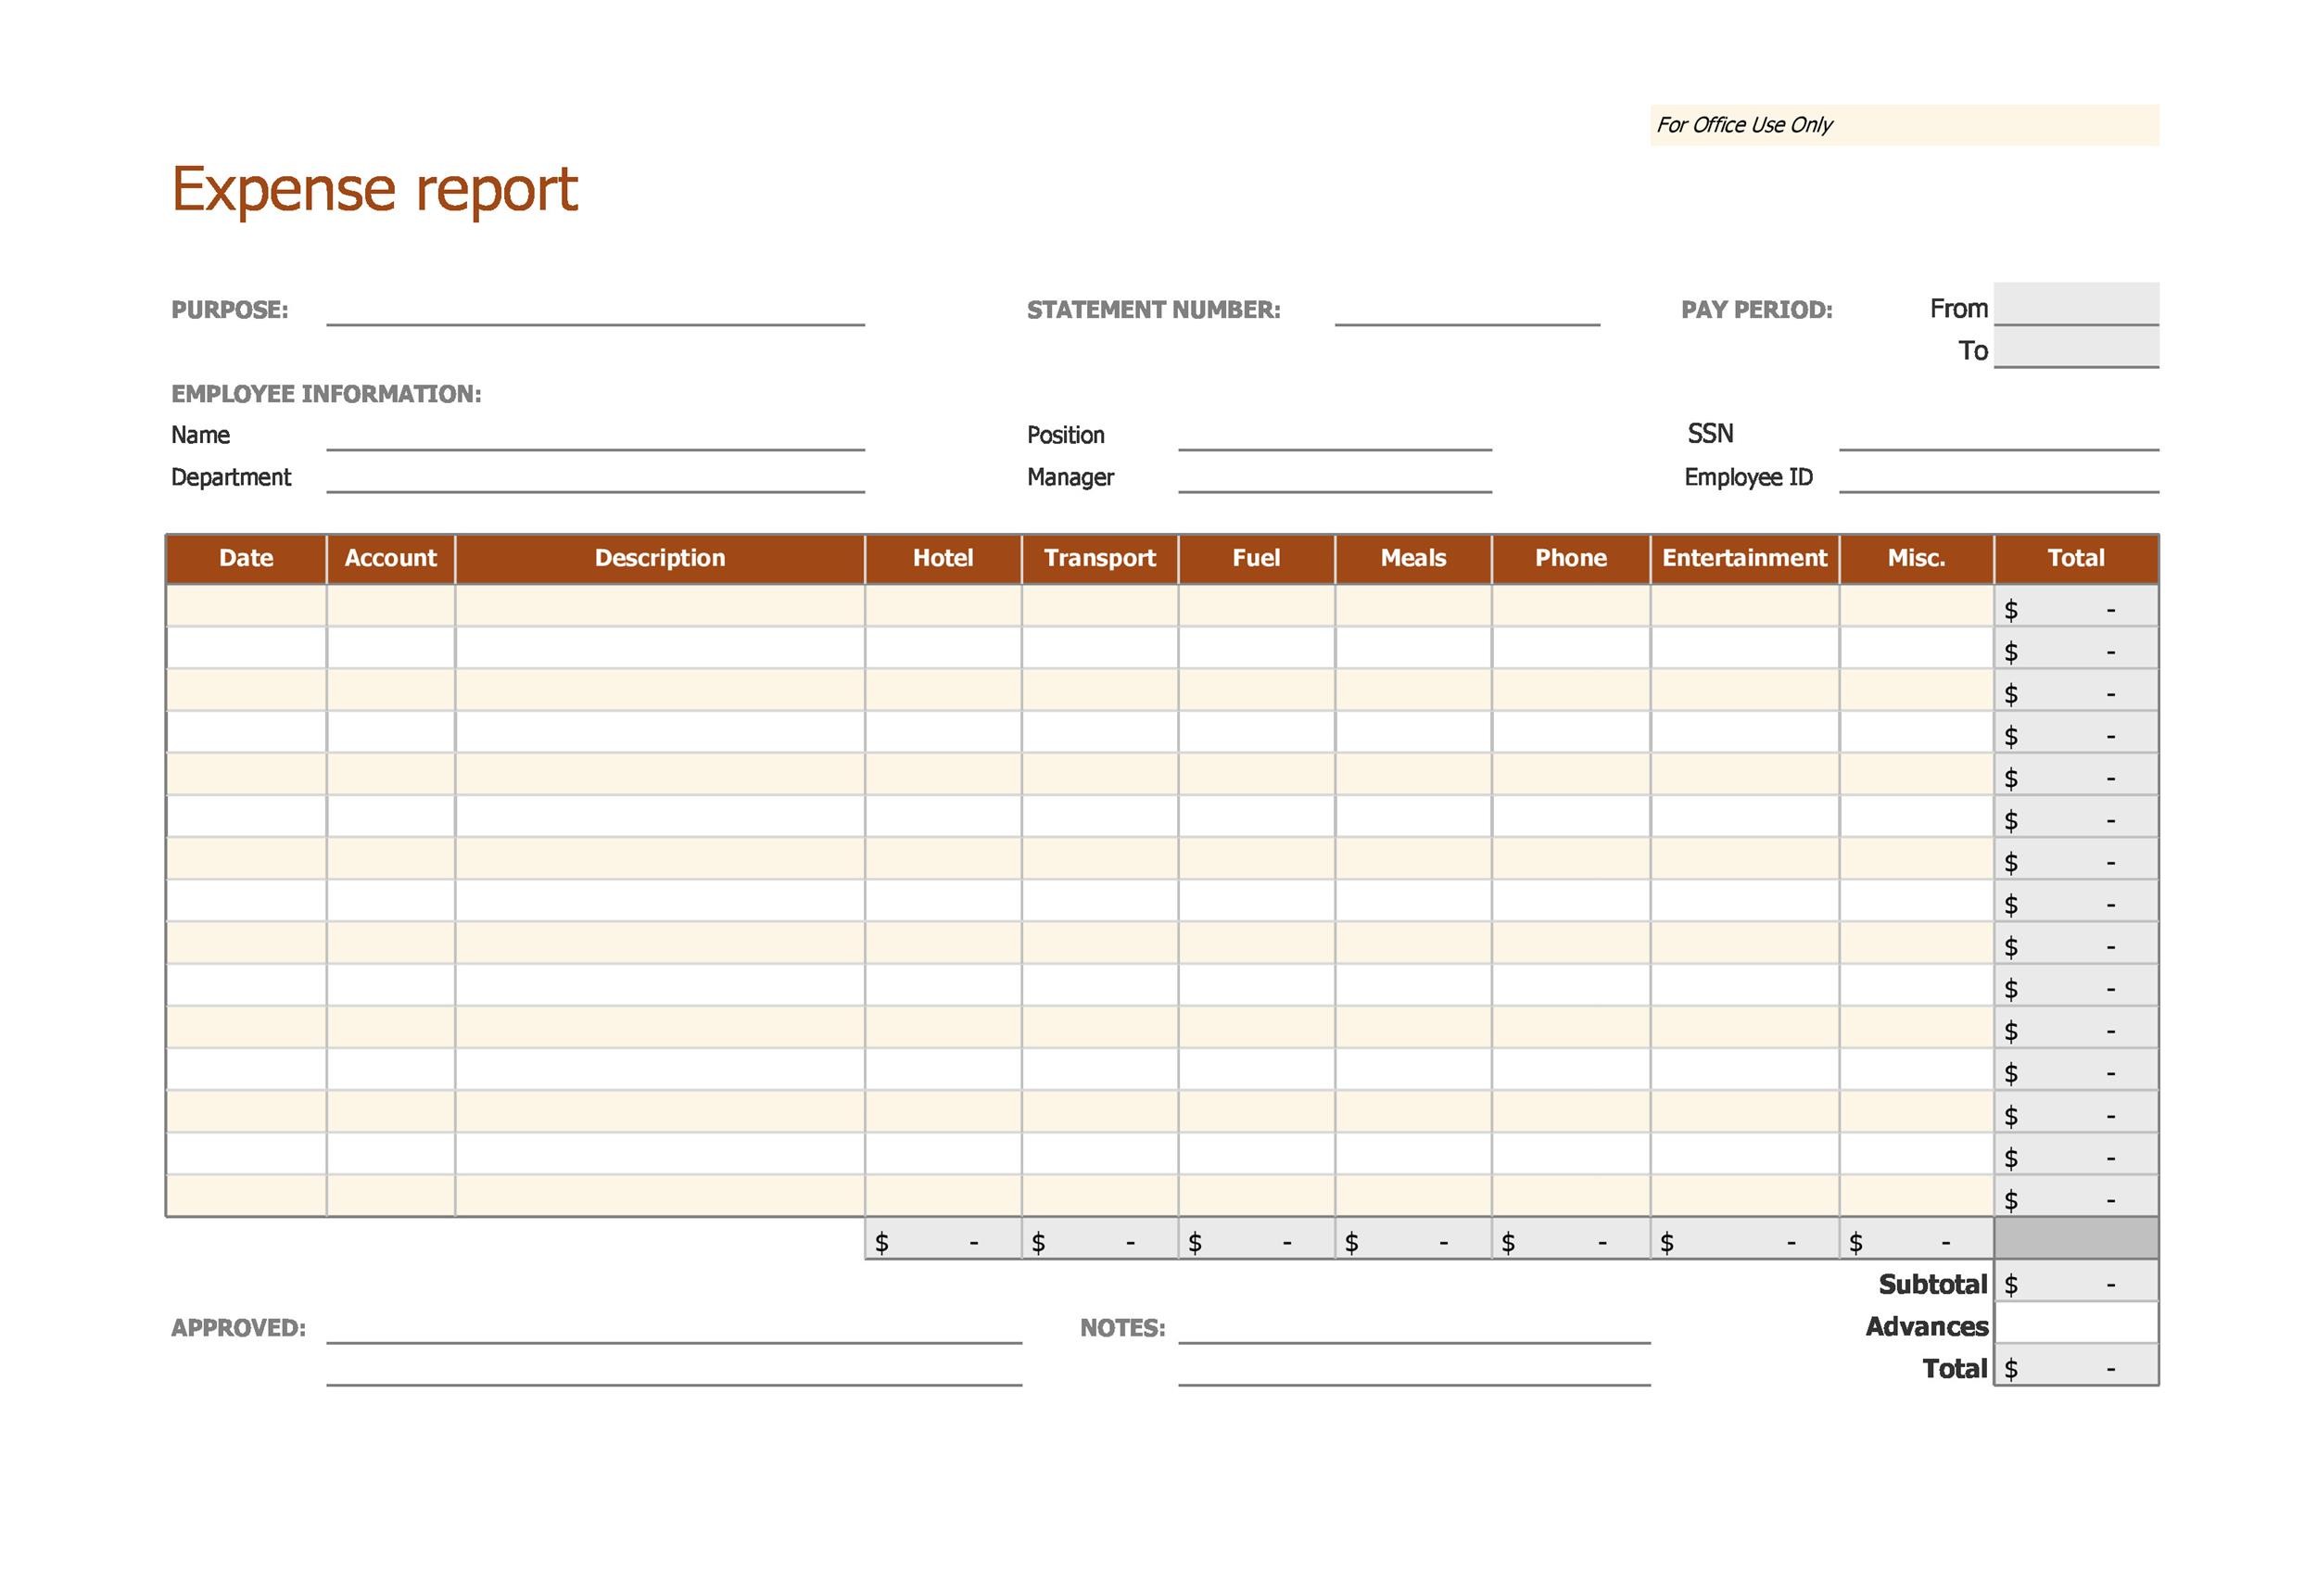 40 Expense Report Templates To Help You Save Money TemplateLab